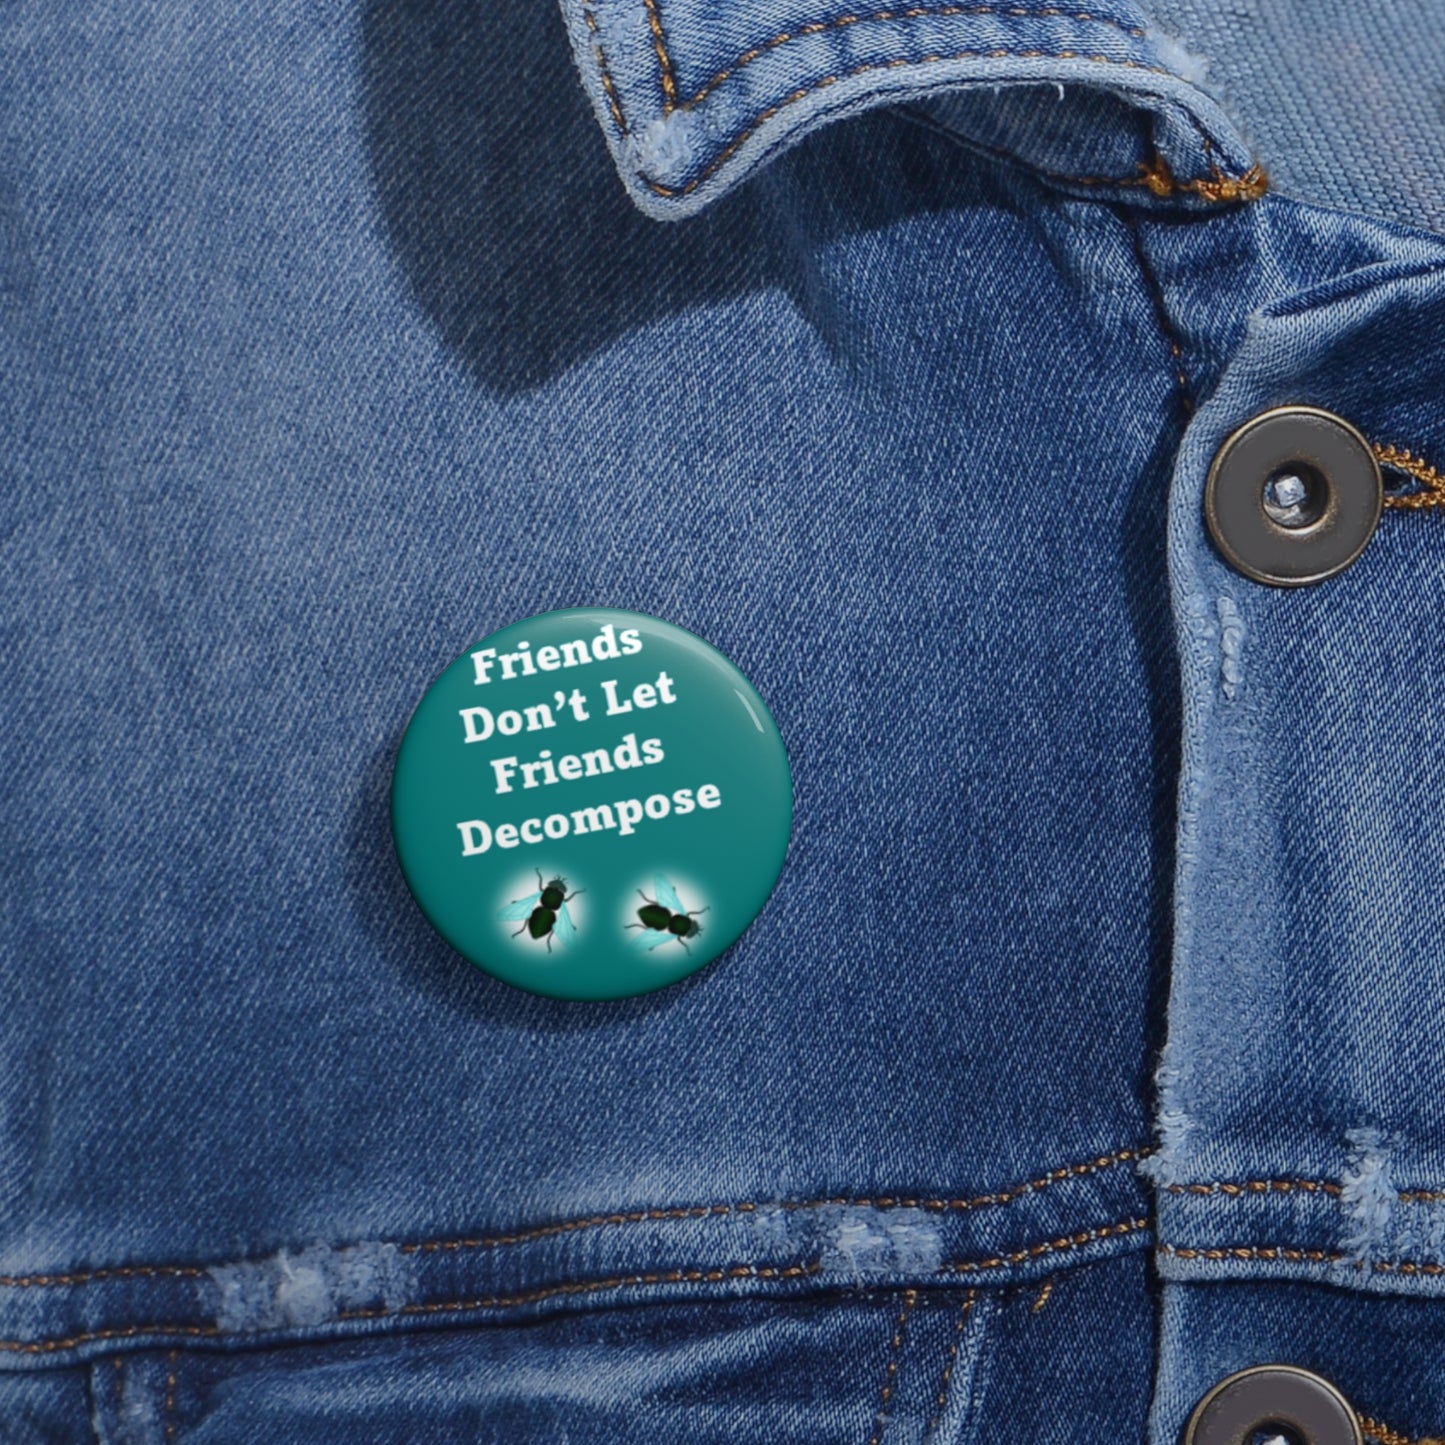 Friends Don't Let Friends Decompose - Teal & Black - Custom Pin Buttons